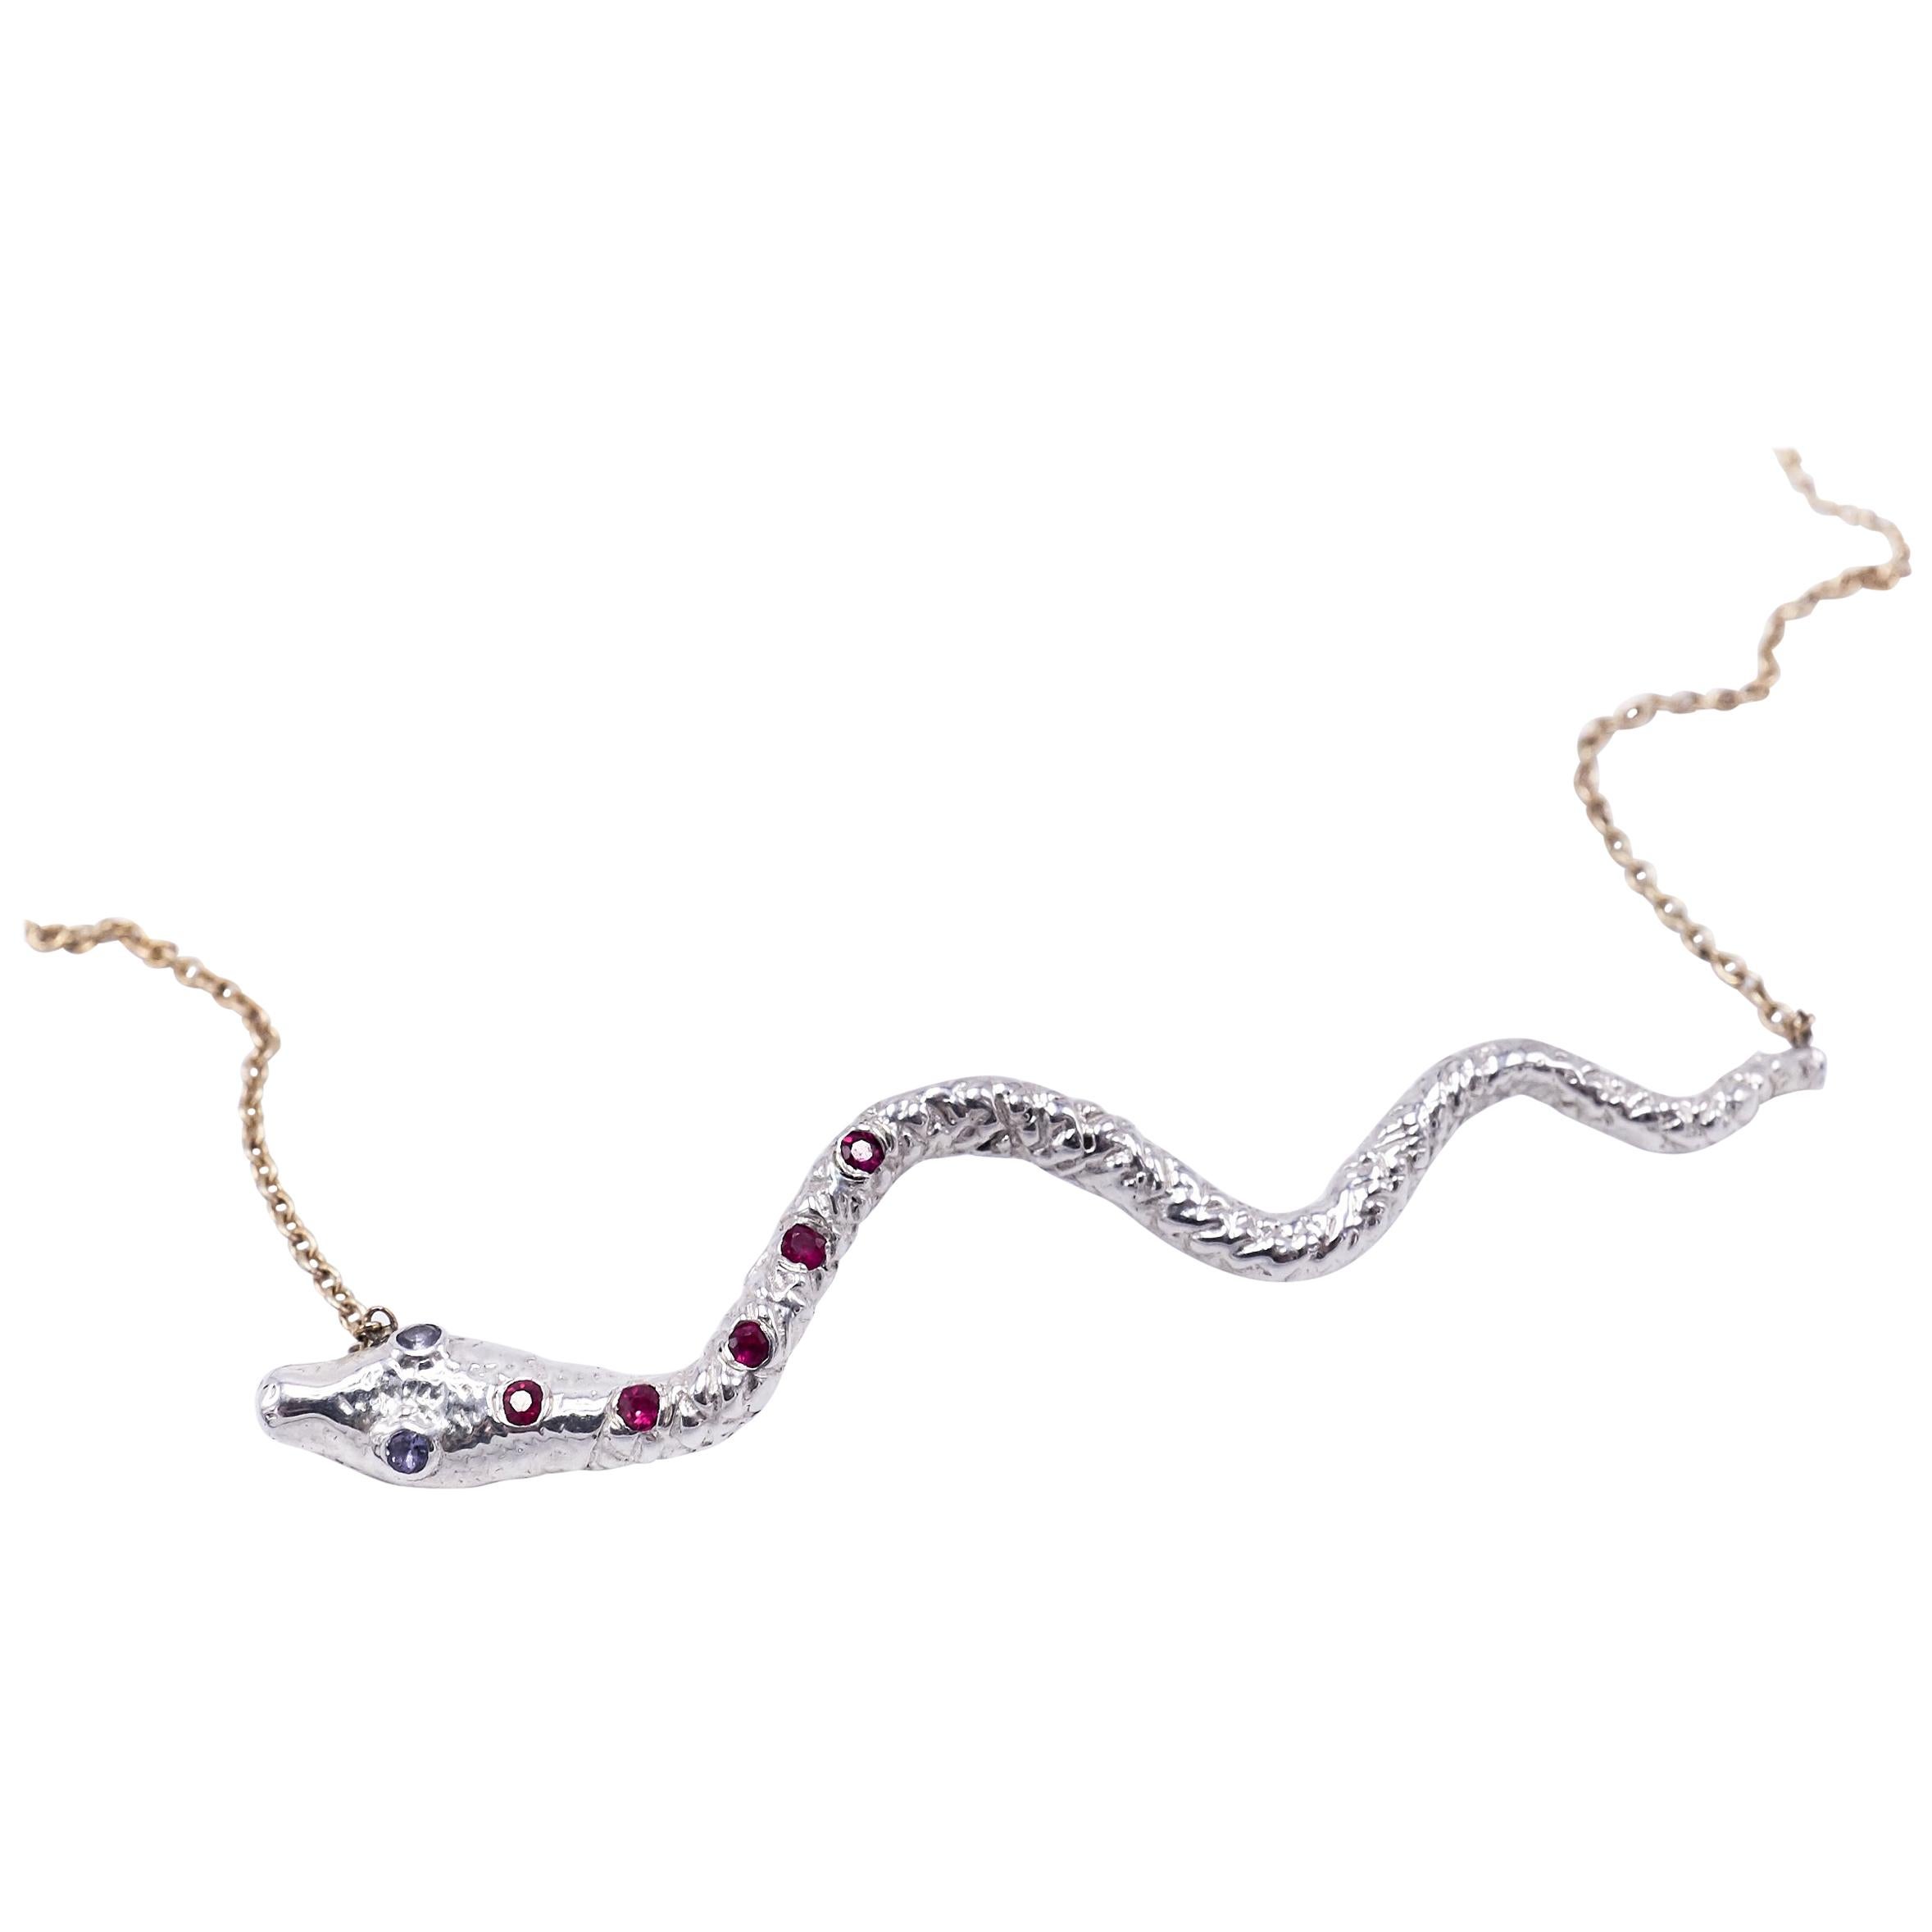 5 Ruby 2 Iolite Snake White Gold Pendant  Yellow Gold Chain Choker Necklace J Dauphin

J DAUPHIN short necklace 